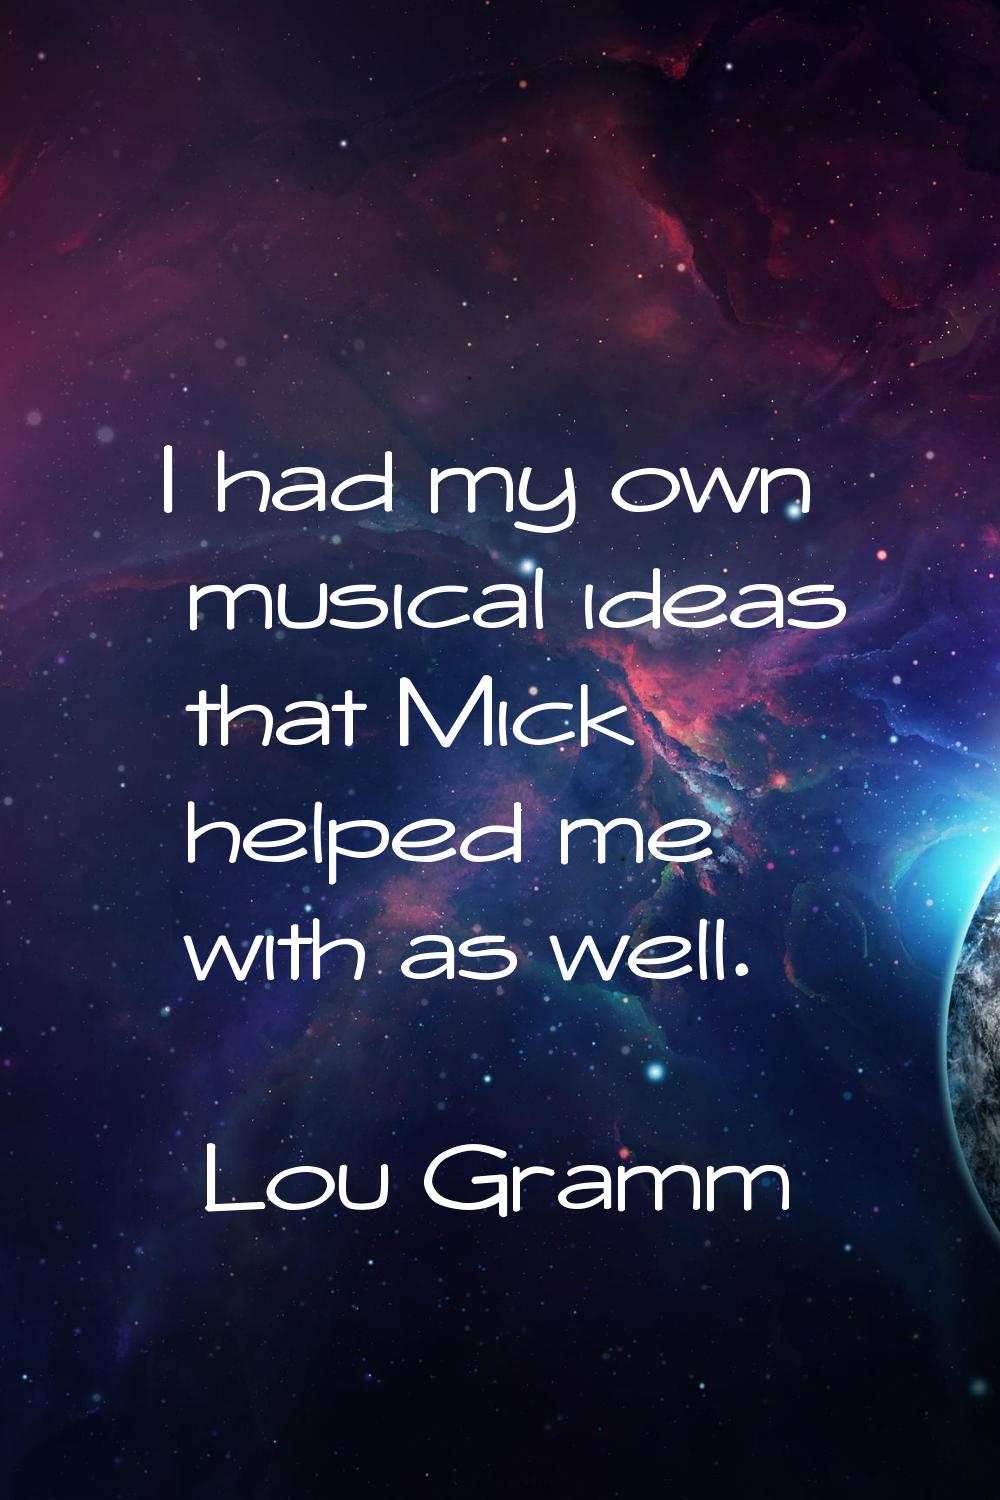 I had my own musical ideas that Mick helped me with as well.